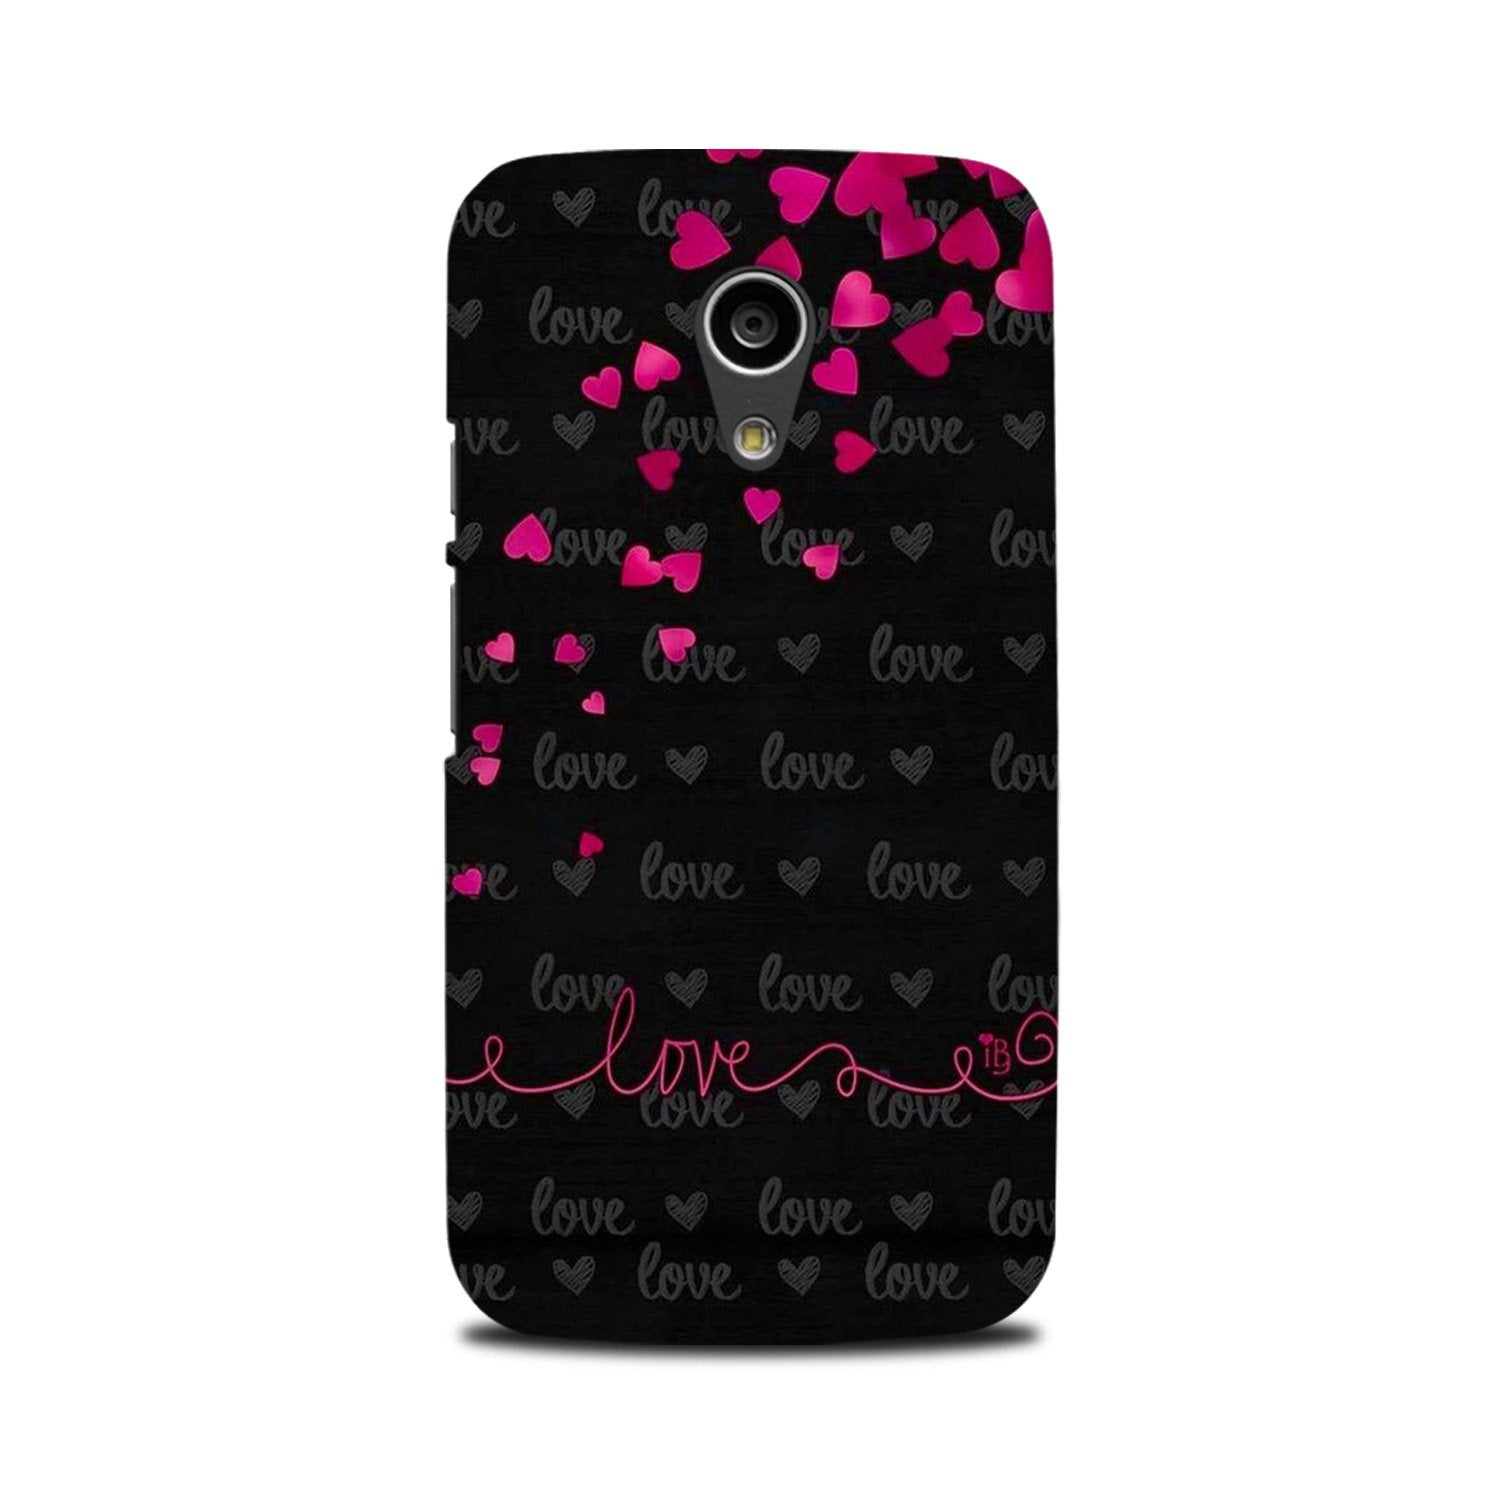 Love in Air Case for Moto G2